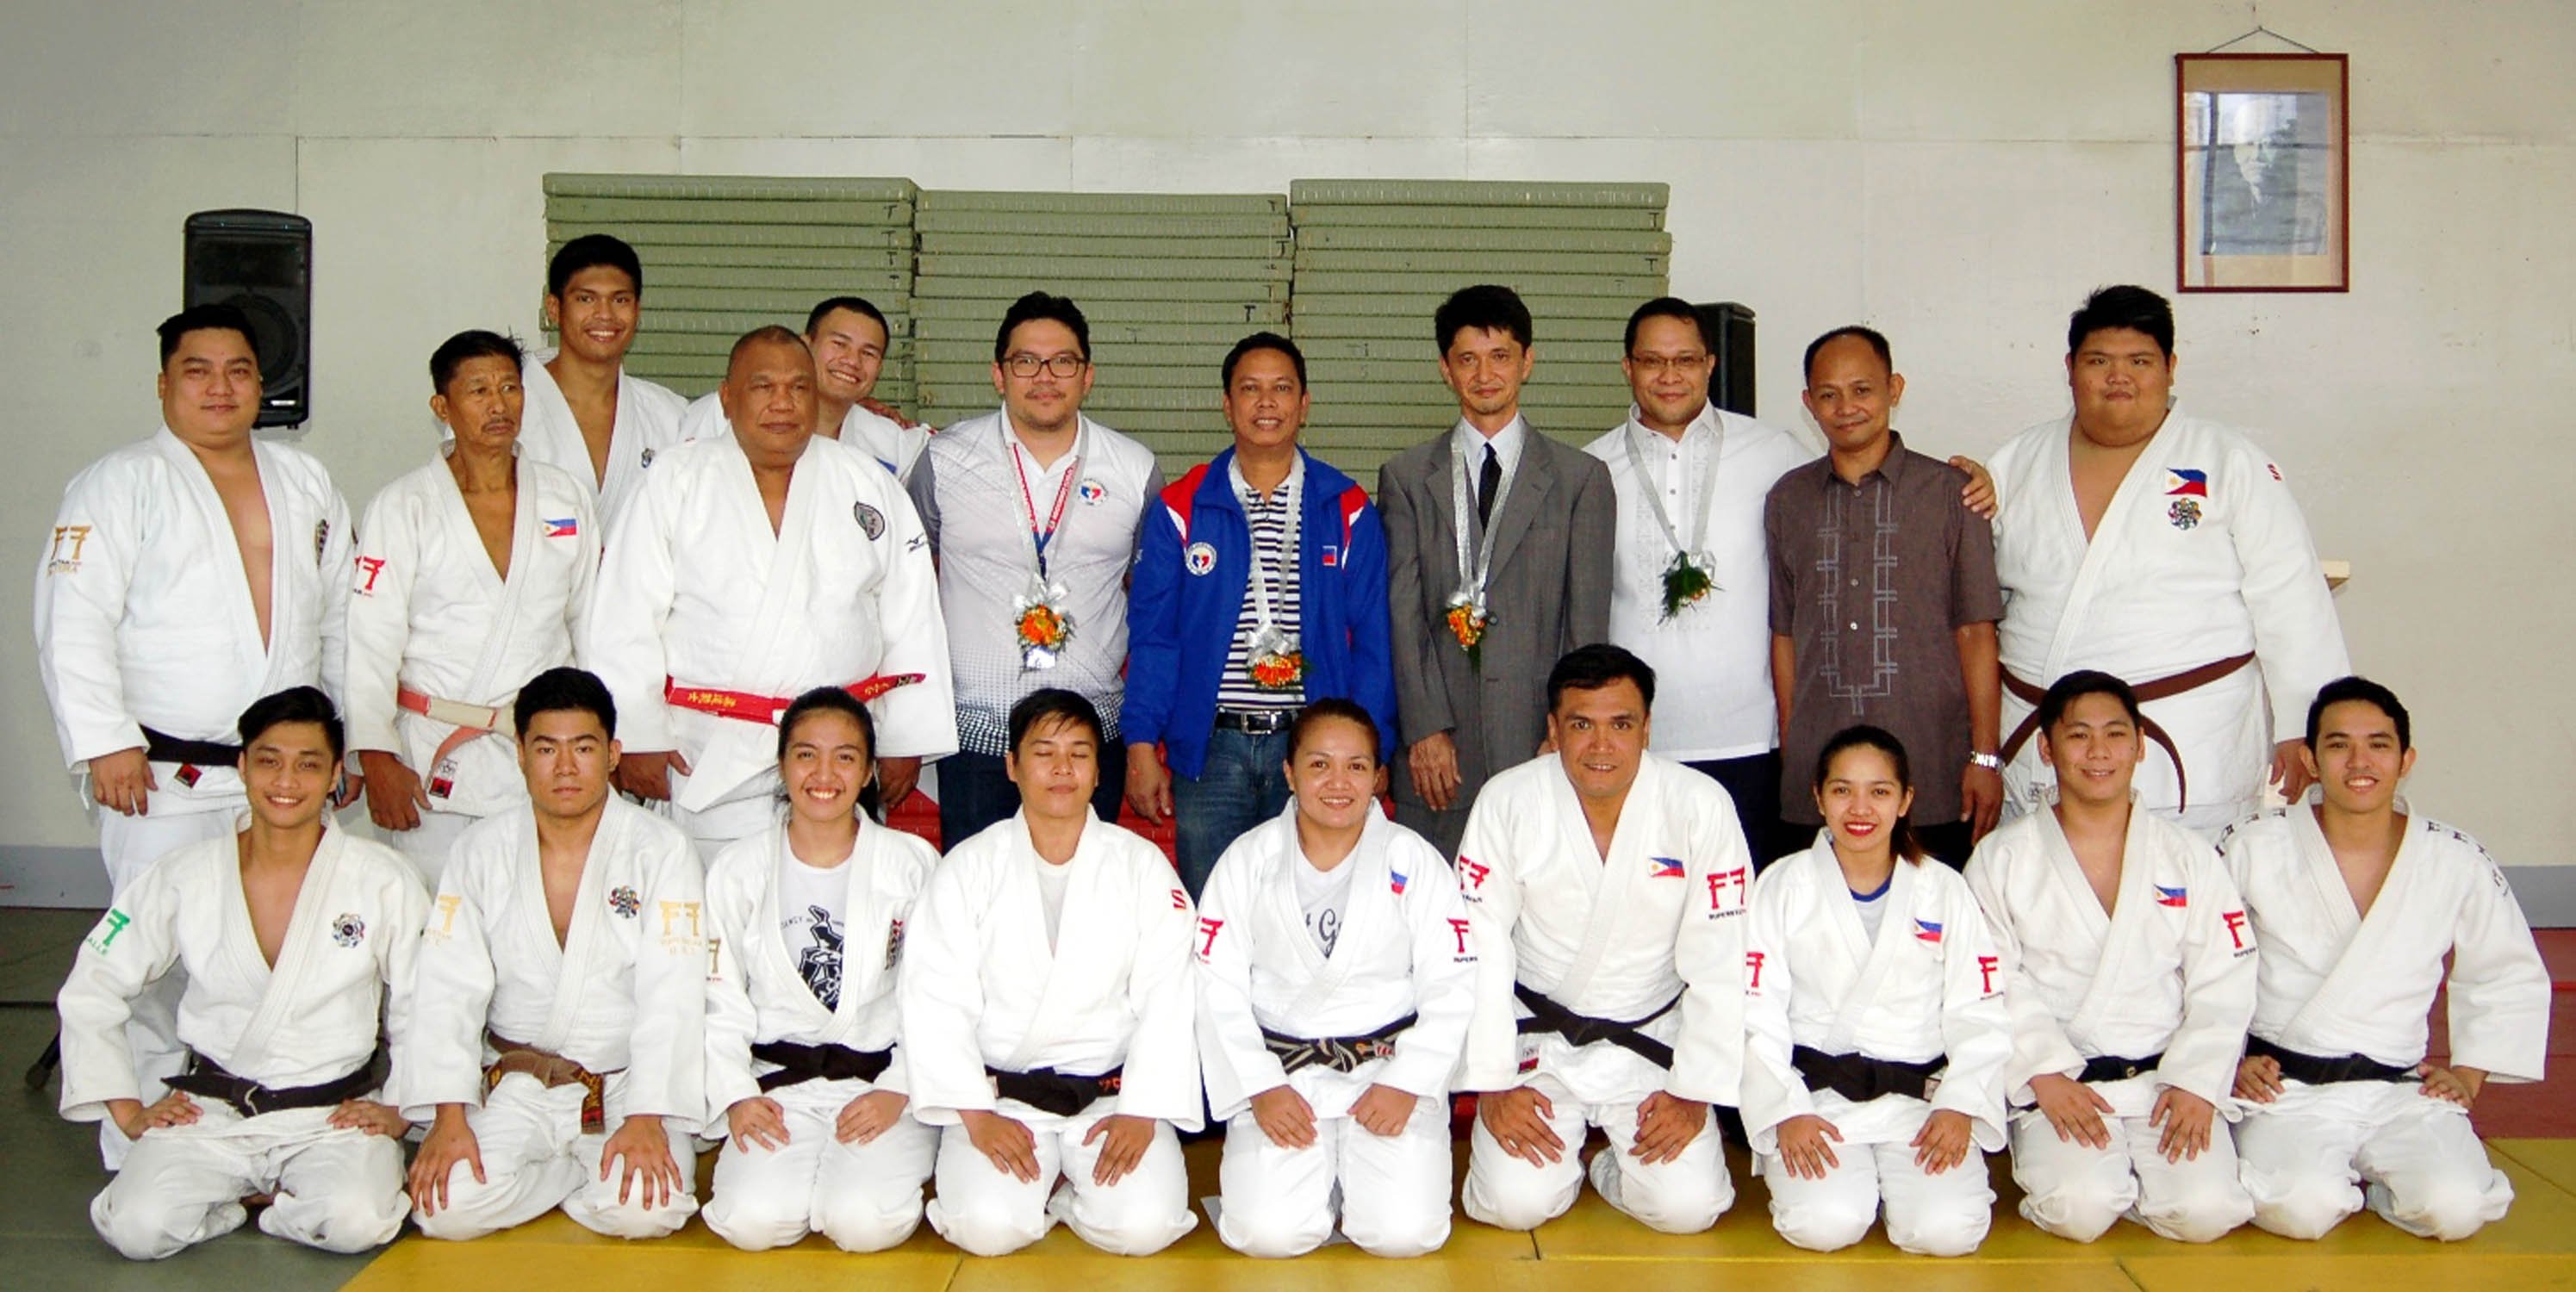 Philippine Judo Federation receives 142 Tatami Mats
from Japan via “Sport for Tomorrow” Programme